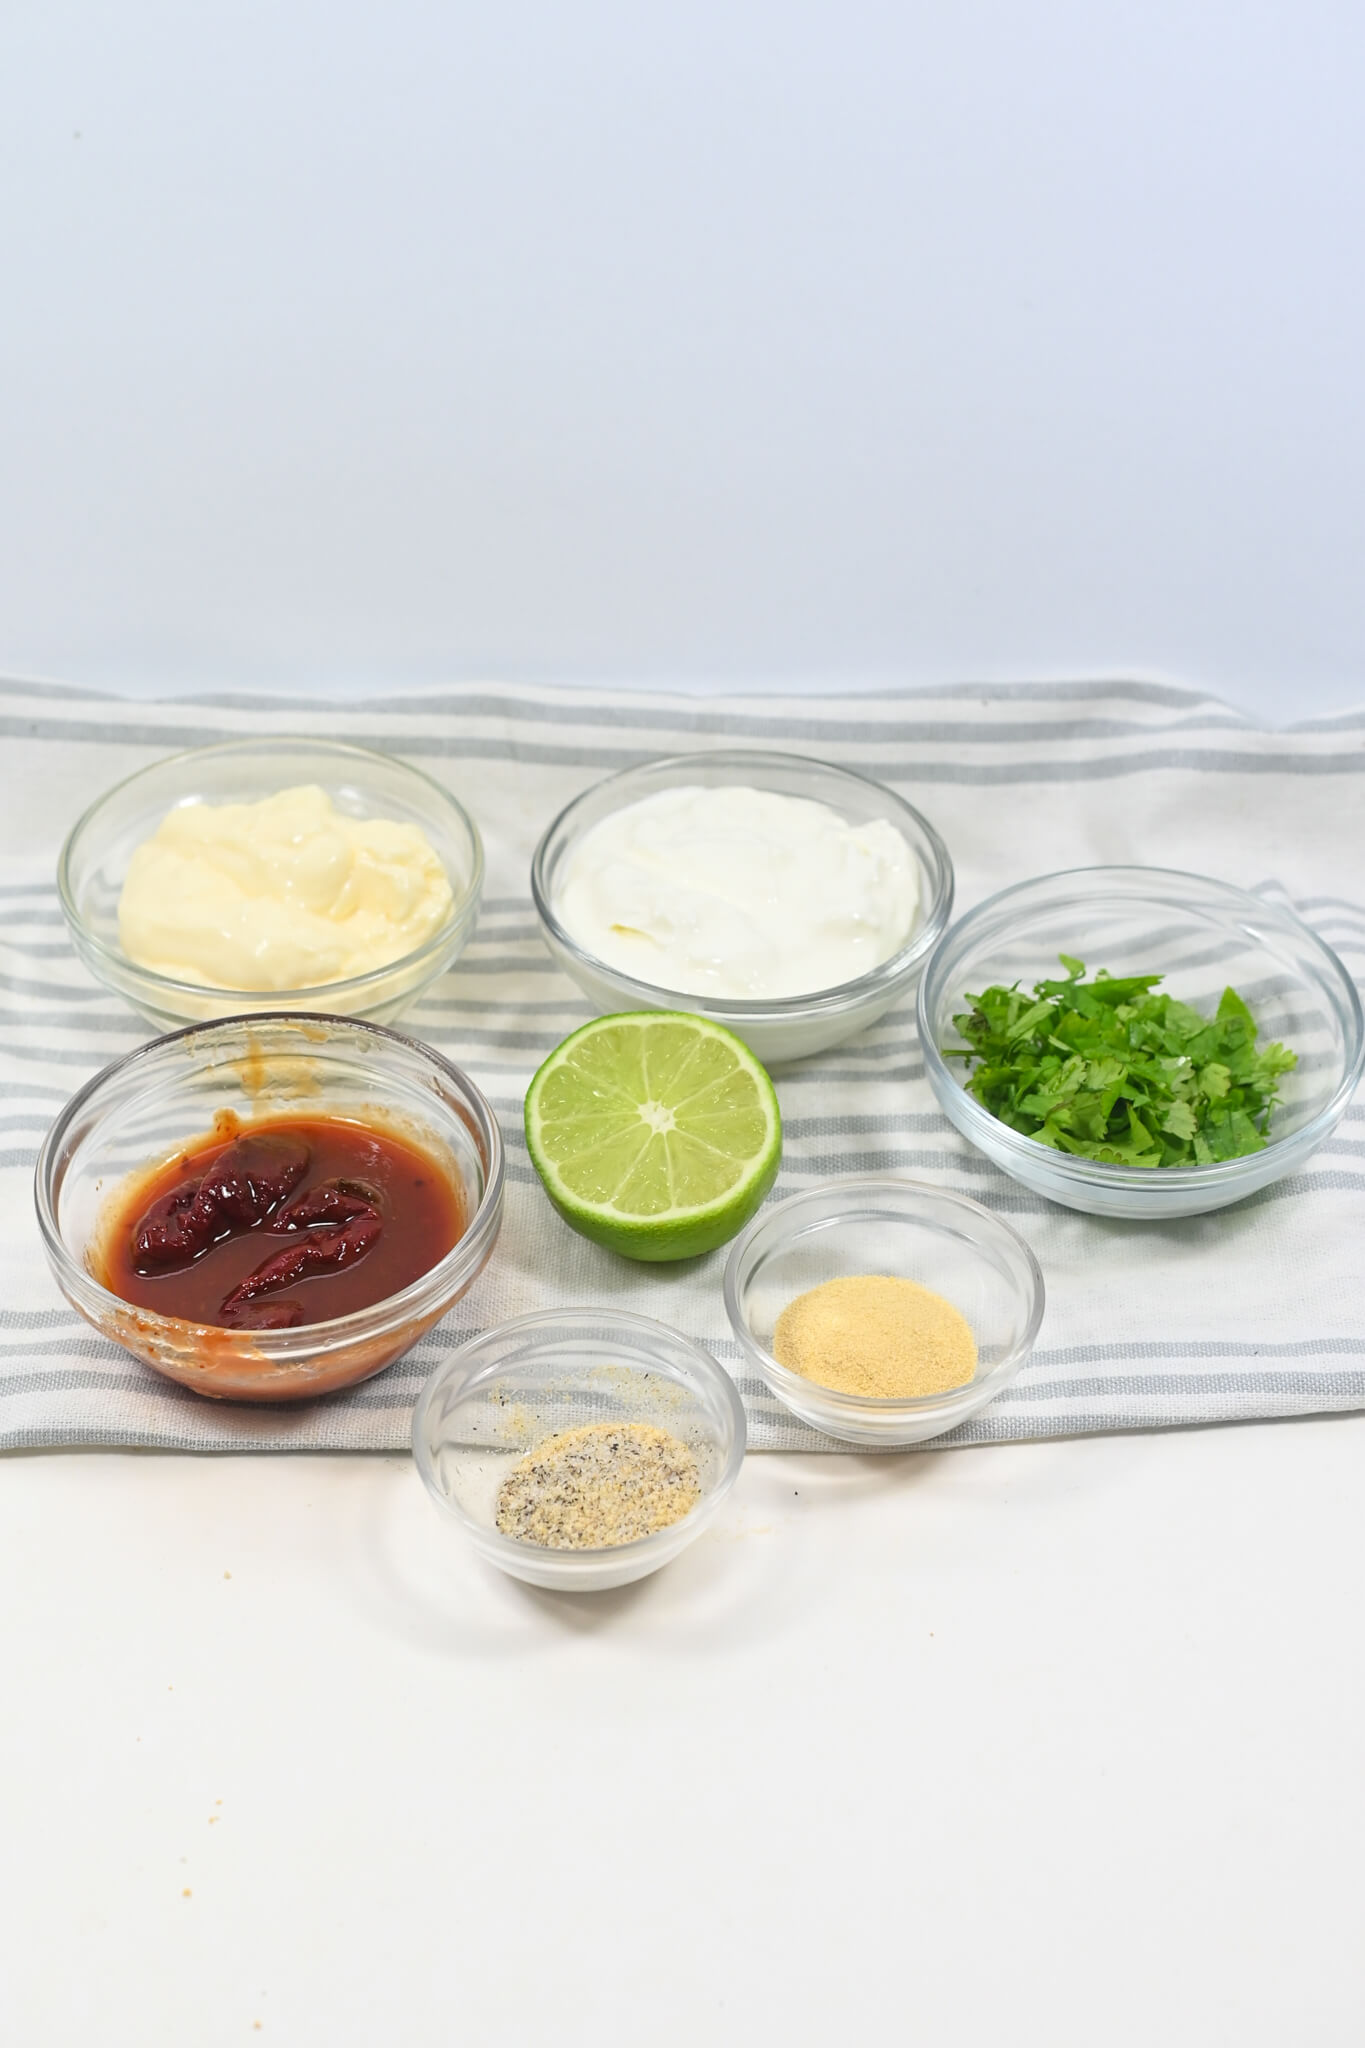 Assorted condiments and seasonings in small bowls, including mayonnaise, lime, cream, chopped herbs, spices, and Baja chipotle sauce.